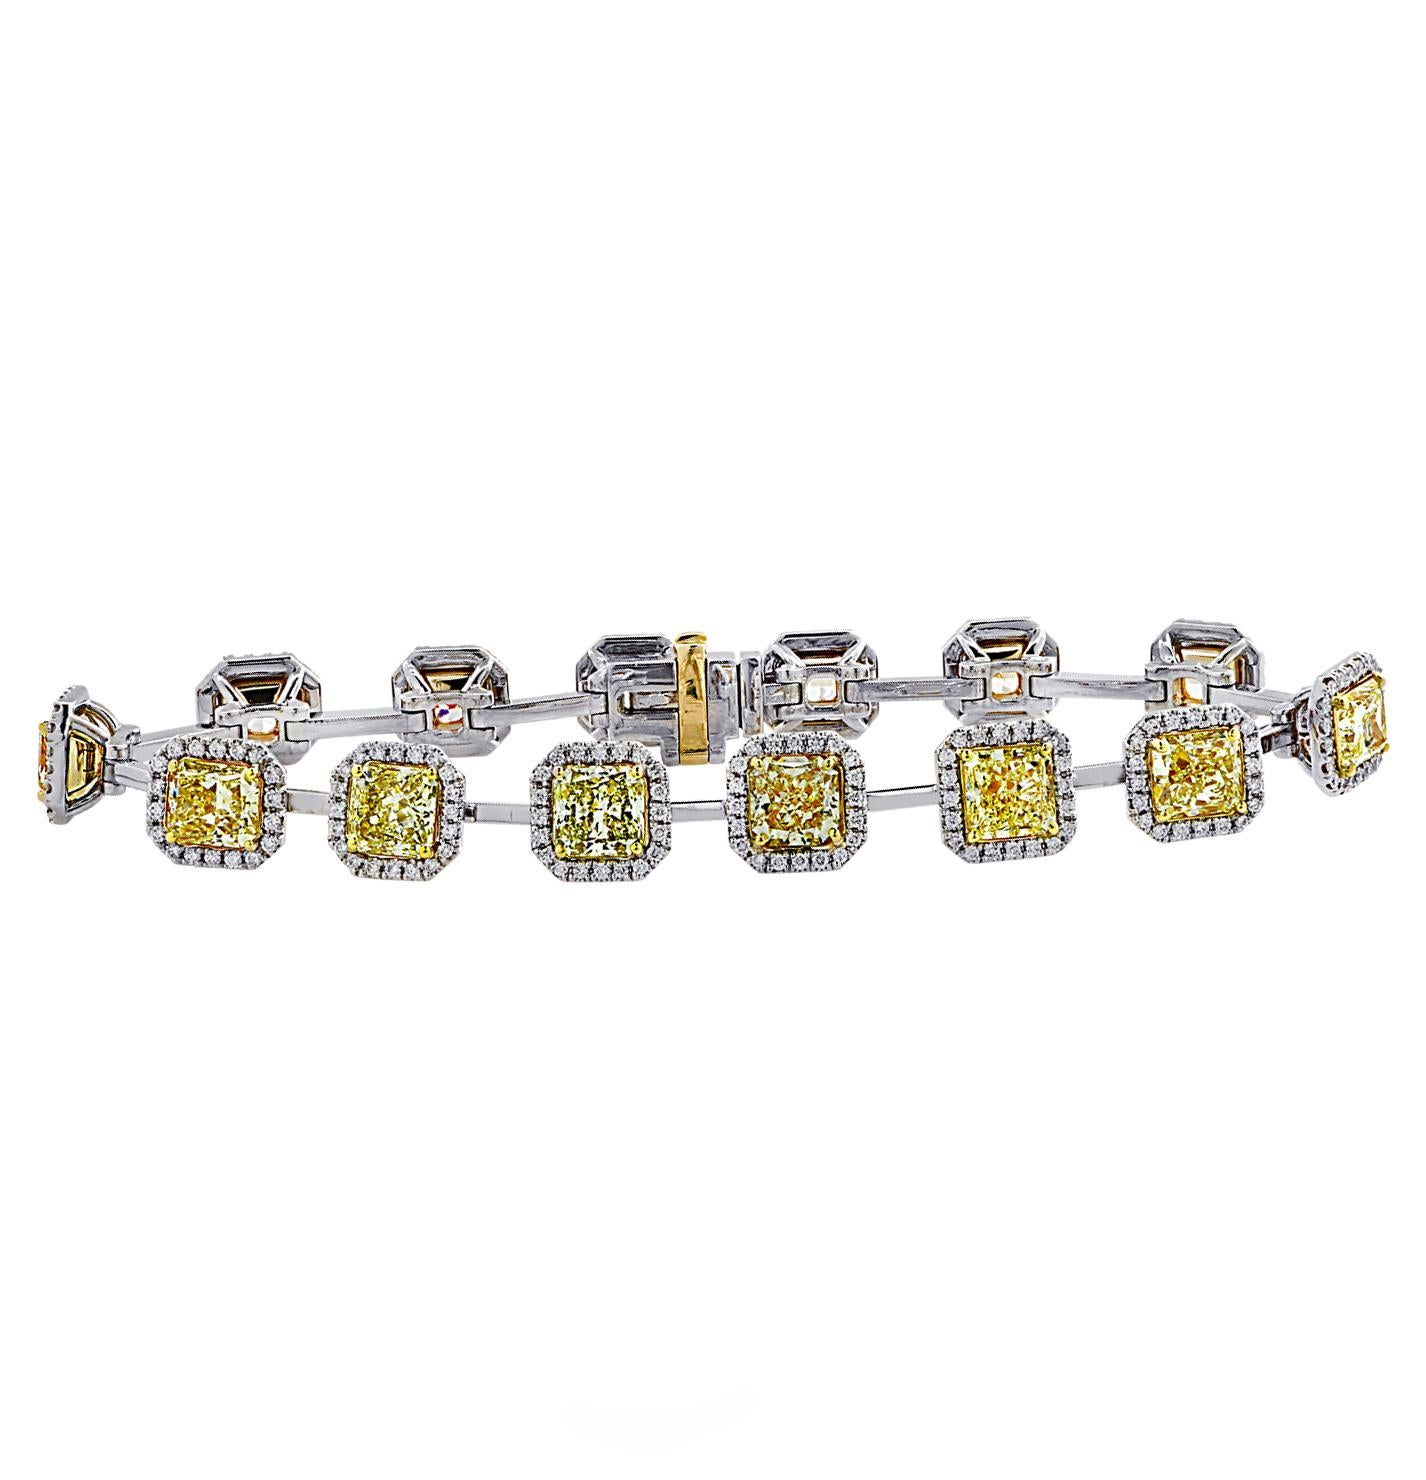 Spectacular Vivid Diamonds bracelet crafted in platinum and 18 karat yellow gold, featuring 14 GIA Certified radiant cut diamonds weighing 12.82 carats total, ranging in color from Fancy Yellow to U color, VVS-SI clarity, framed in 258 round